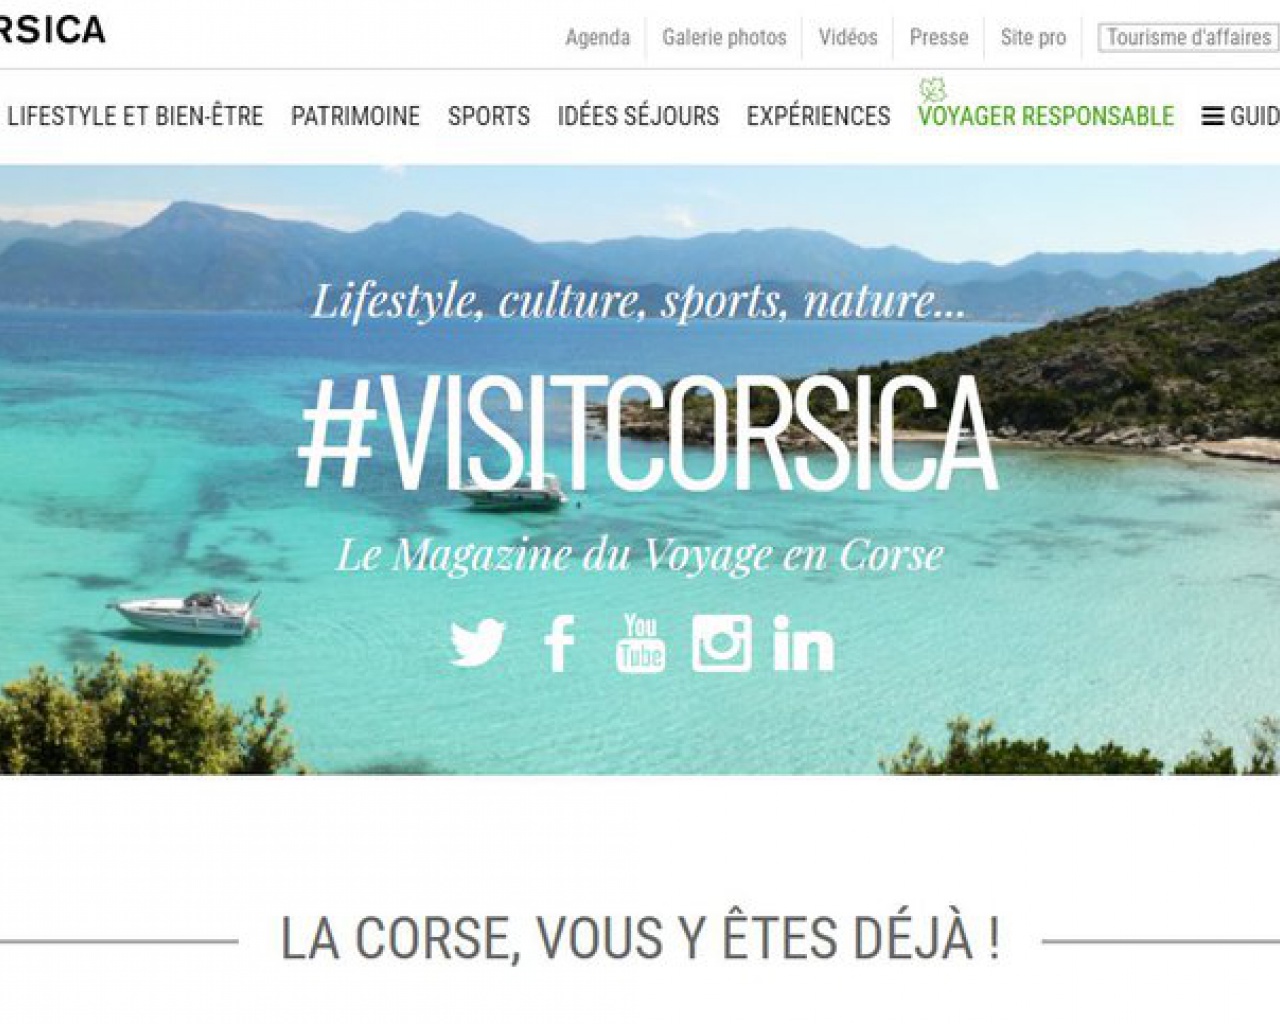 Tourism office in Corsica